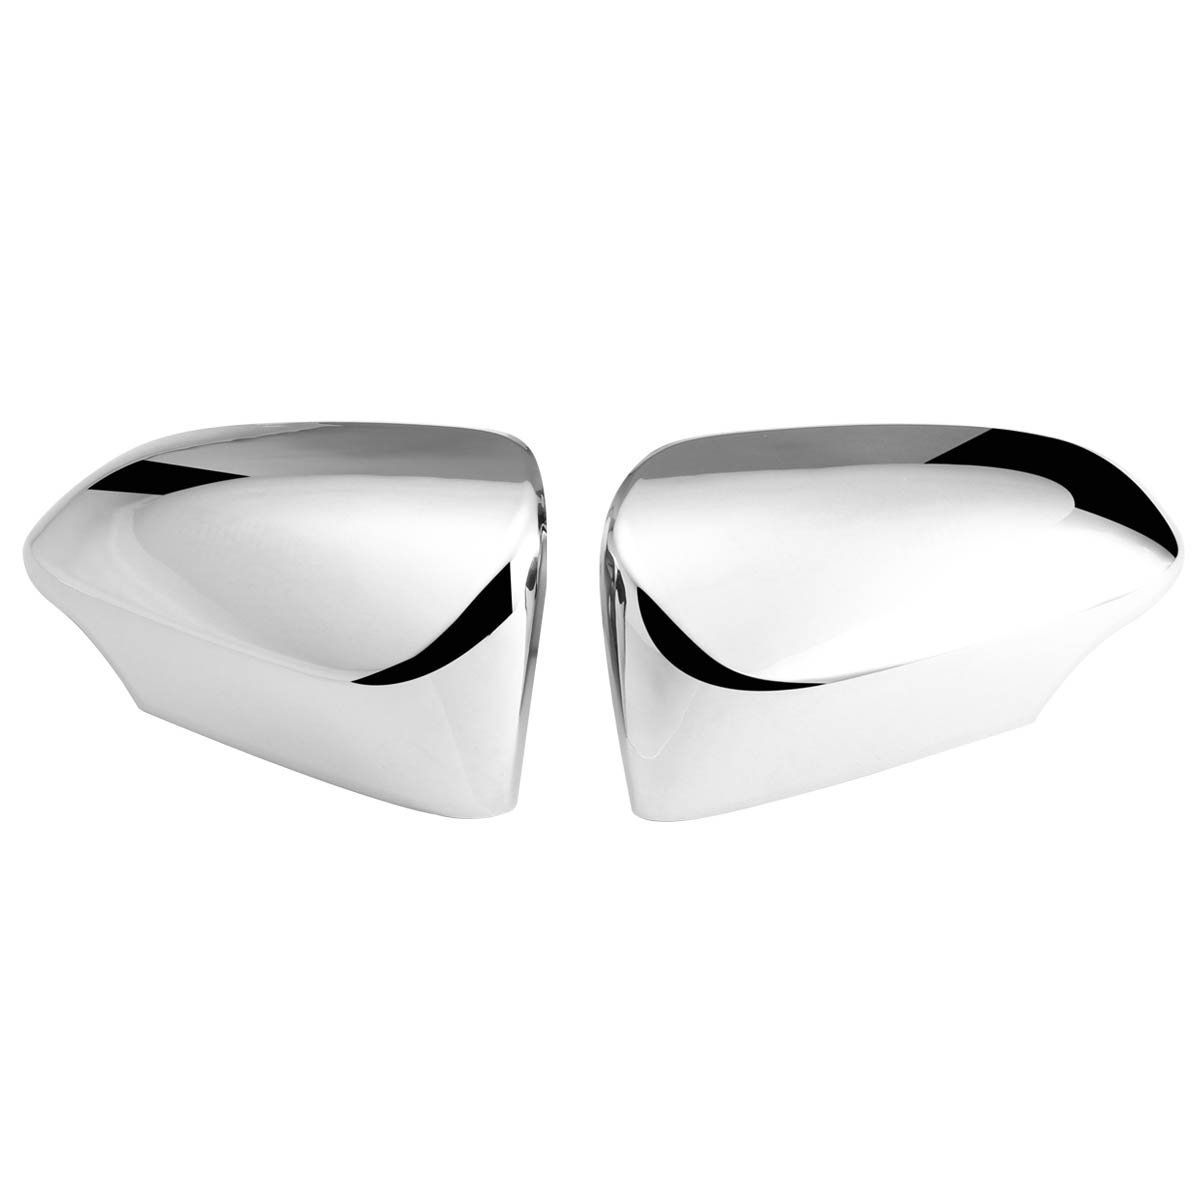 SIDE MIRROR COVERS FOR CHEVROLET ENJOY (SET OF 2PCS)